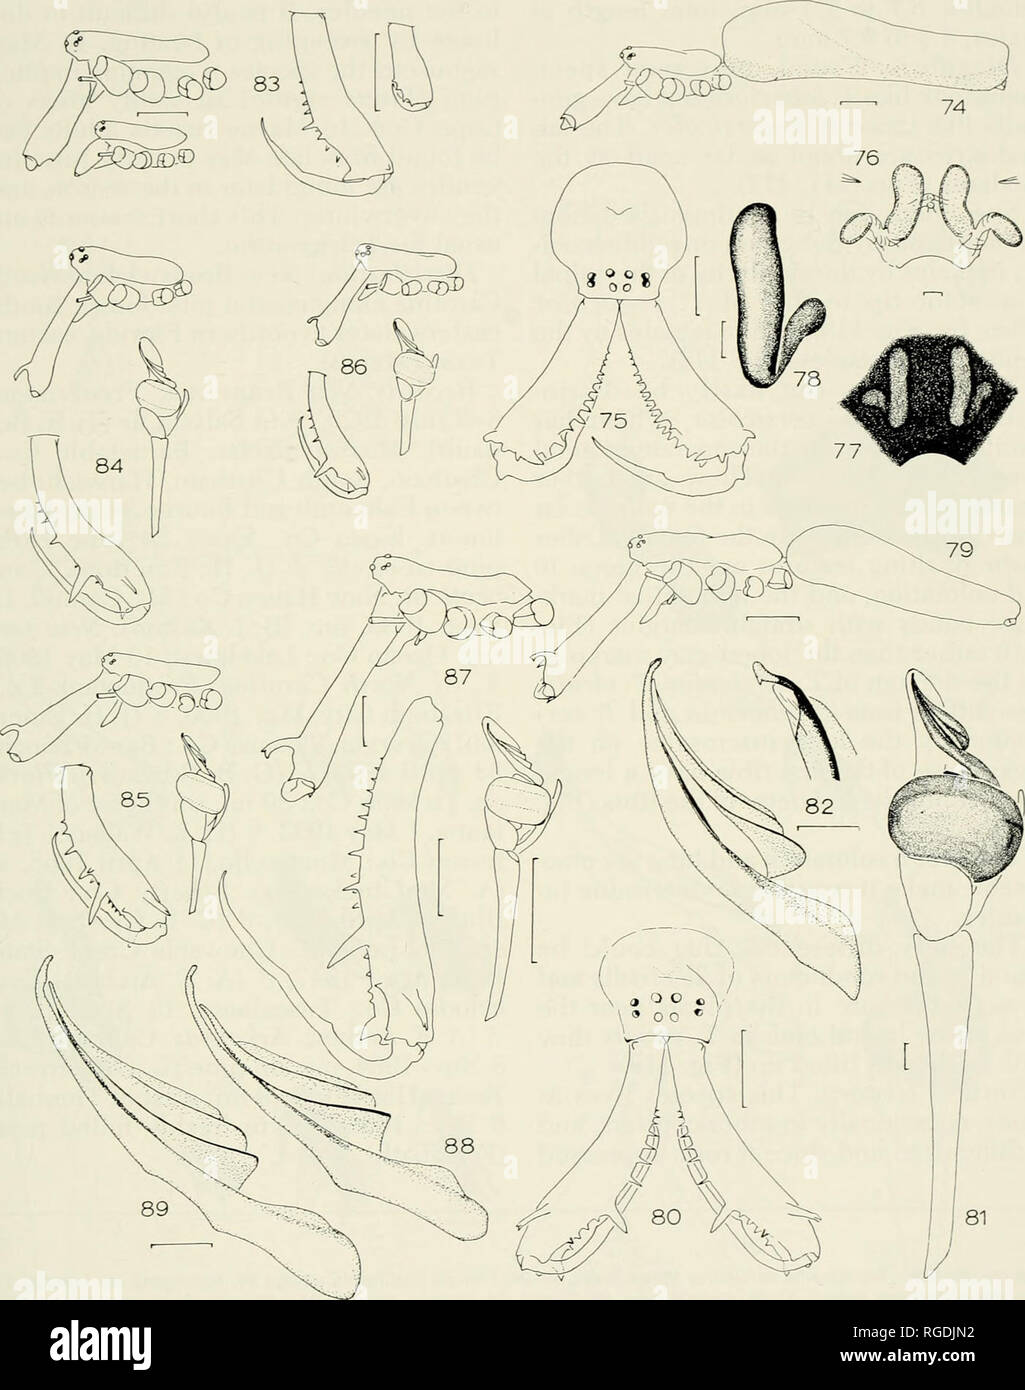 . Bulletin of the Museum of Comparative Zoology at Harvard College. Zoology. DoLicHOGNATHA AND Tetragnatha North OF MEXICO • Levi 305. Figures 74-89. Tetragnatha elongata Walckenaer. 74-78. Female. 74. Lateral. 75. Chelicerae and eye region. 76-78. Genital area. 76. Dorsal. 77. Ventral, cleared. 78. Left seminal receptacles, ventral. 79-82, Male. 79. Lateral. 80. Chelicerae and eye region. 81, 82. Left palpus. 82. Conductor and embolus, ventral, and conductor tip, mesal. 83-89. Variation. 83. Carapace and left chelicera of two adult females collected together (Massachusetts). 84-87. Male carap Stock Photo